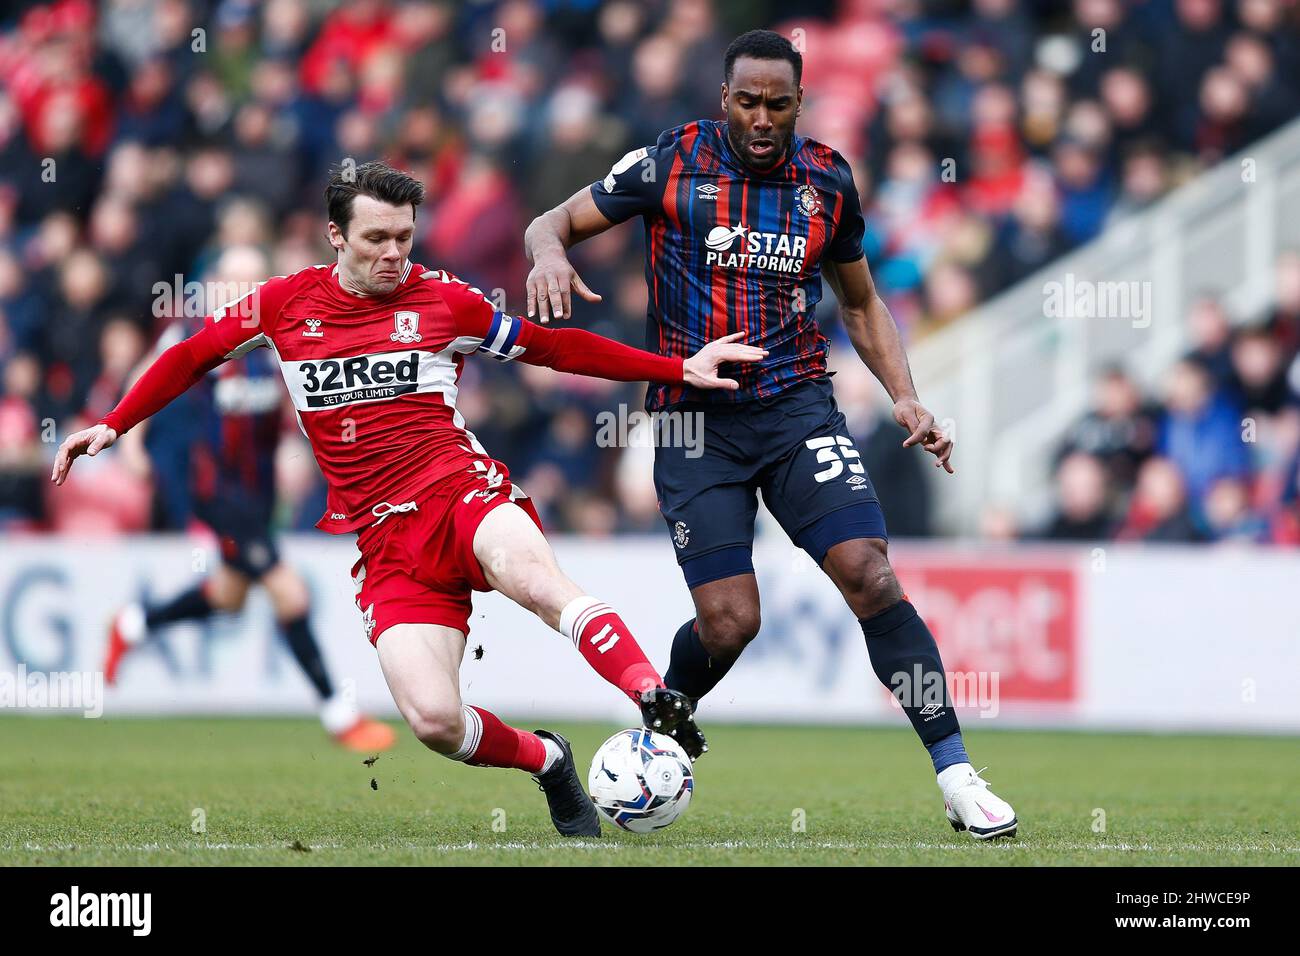 Middlesbrough's Jonny Howson and Luton Town's Cameron Jerome in action during the Sky Bet Championship match at the Riverside Stadium, Middlesbrough. Picture date: Saturday March 5, 2022. Stock Photo